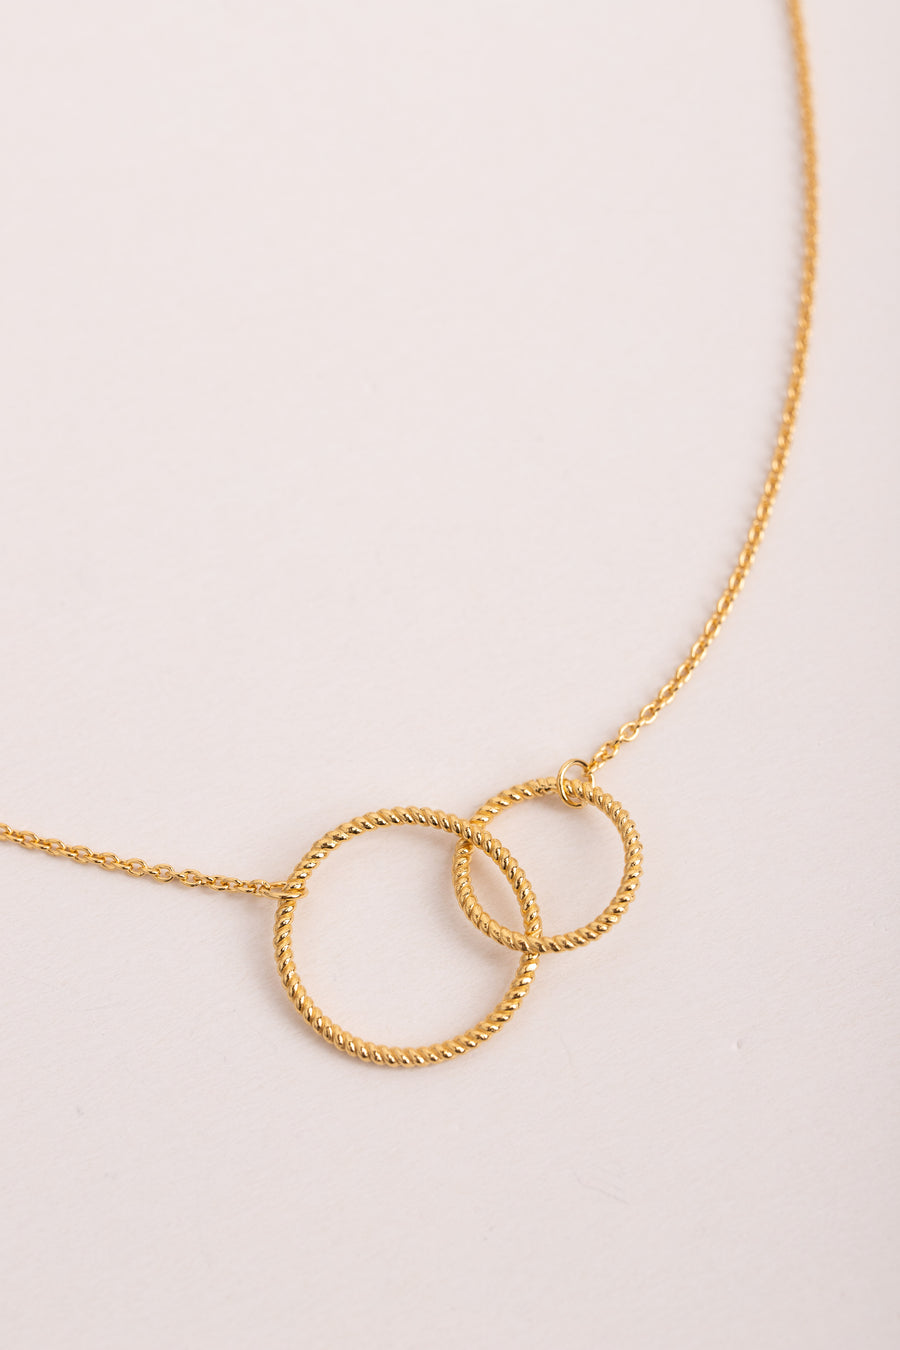 Pernille Corydon Double Twisted Kette gold